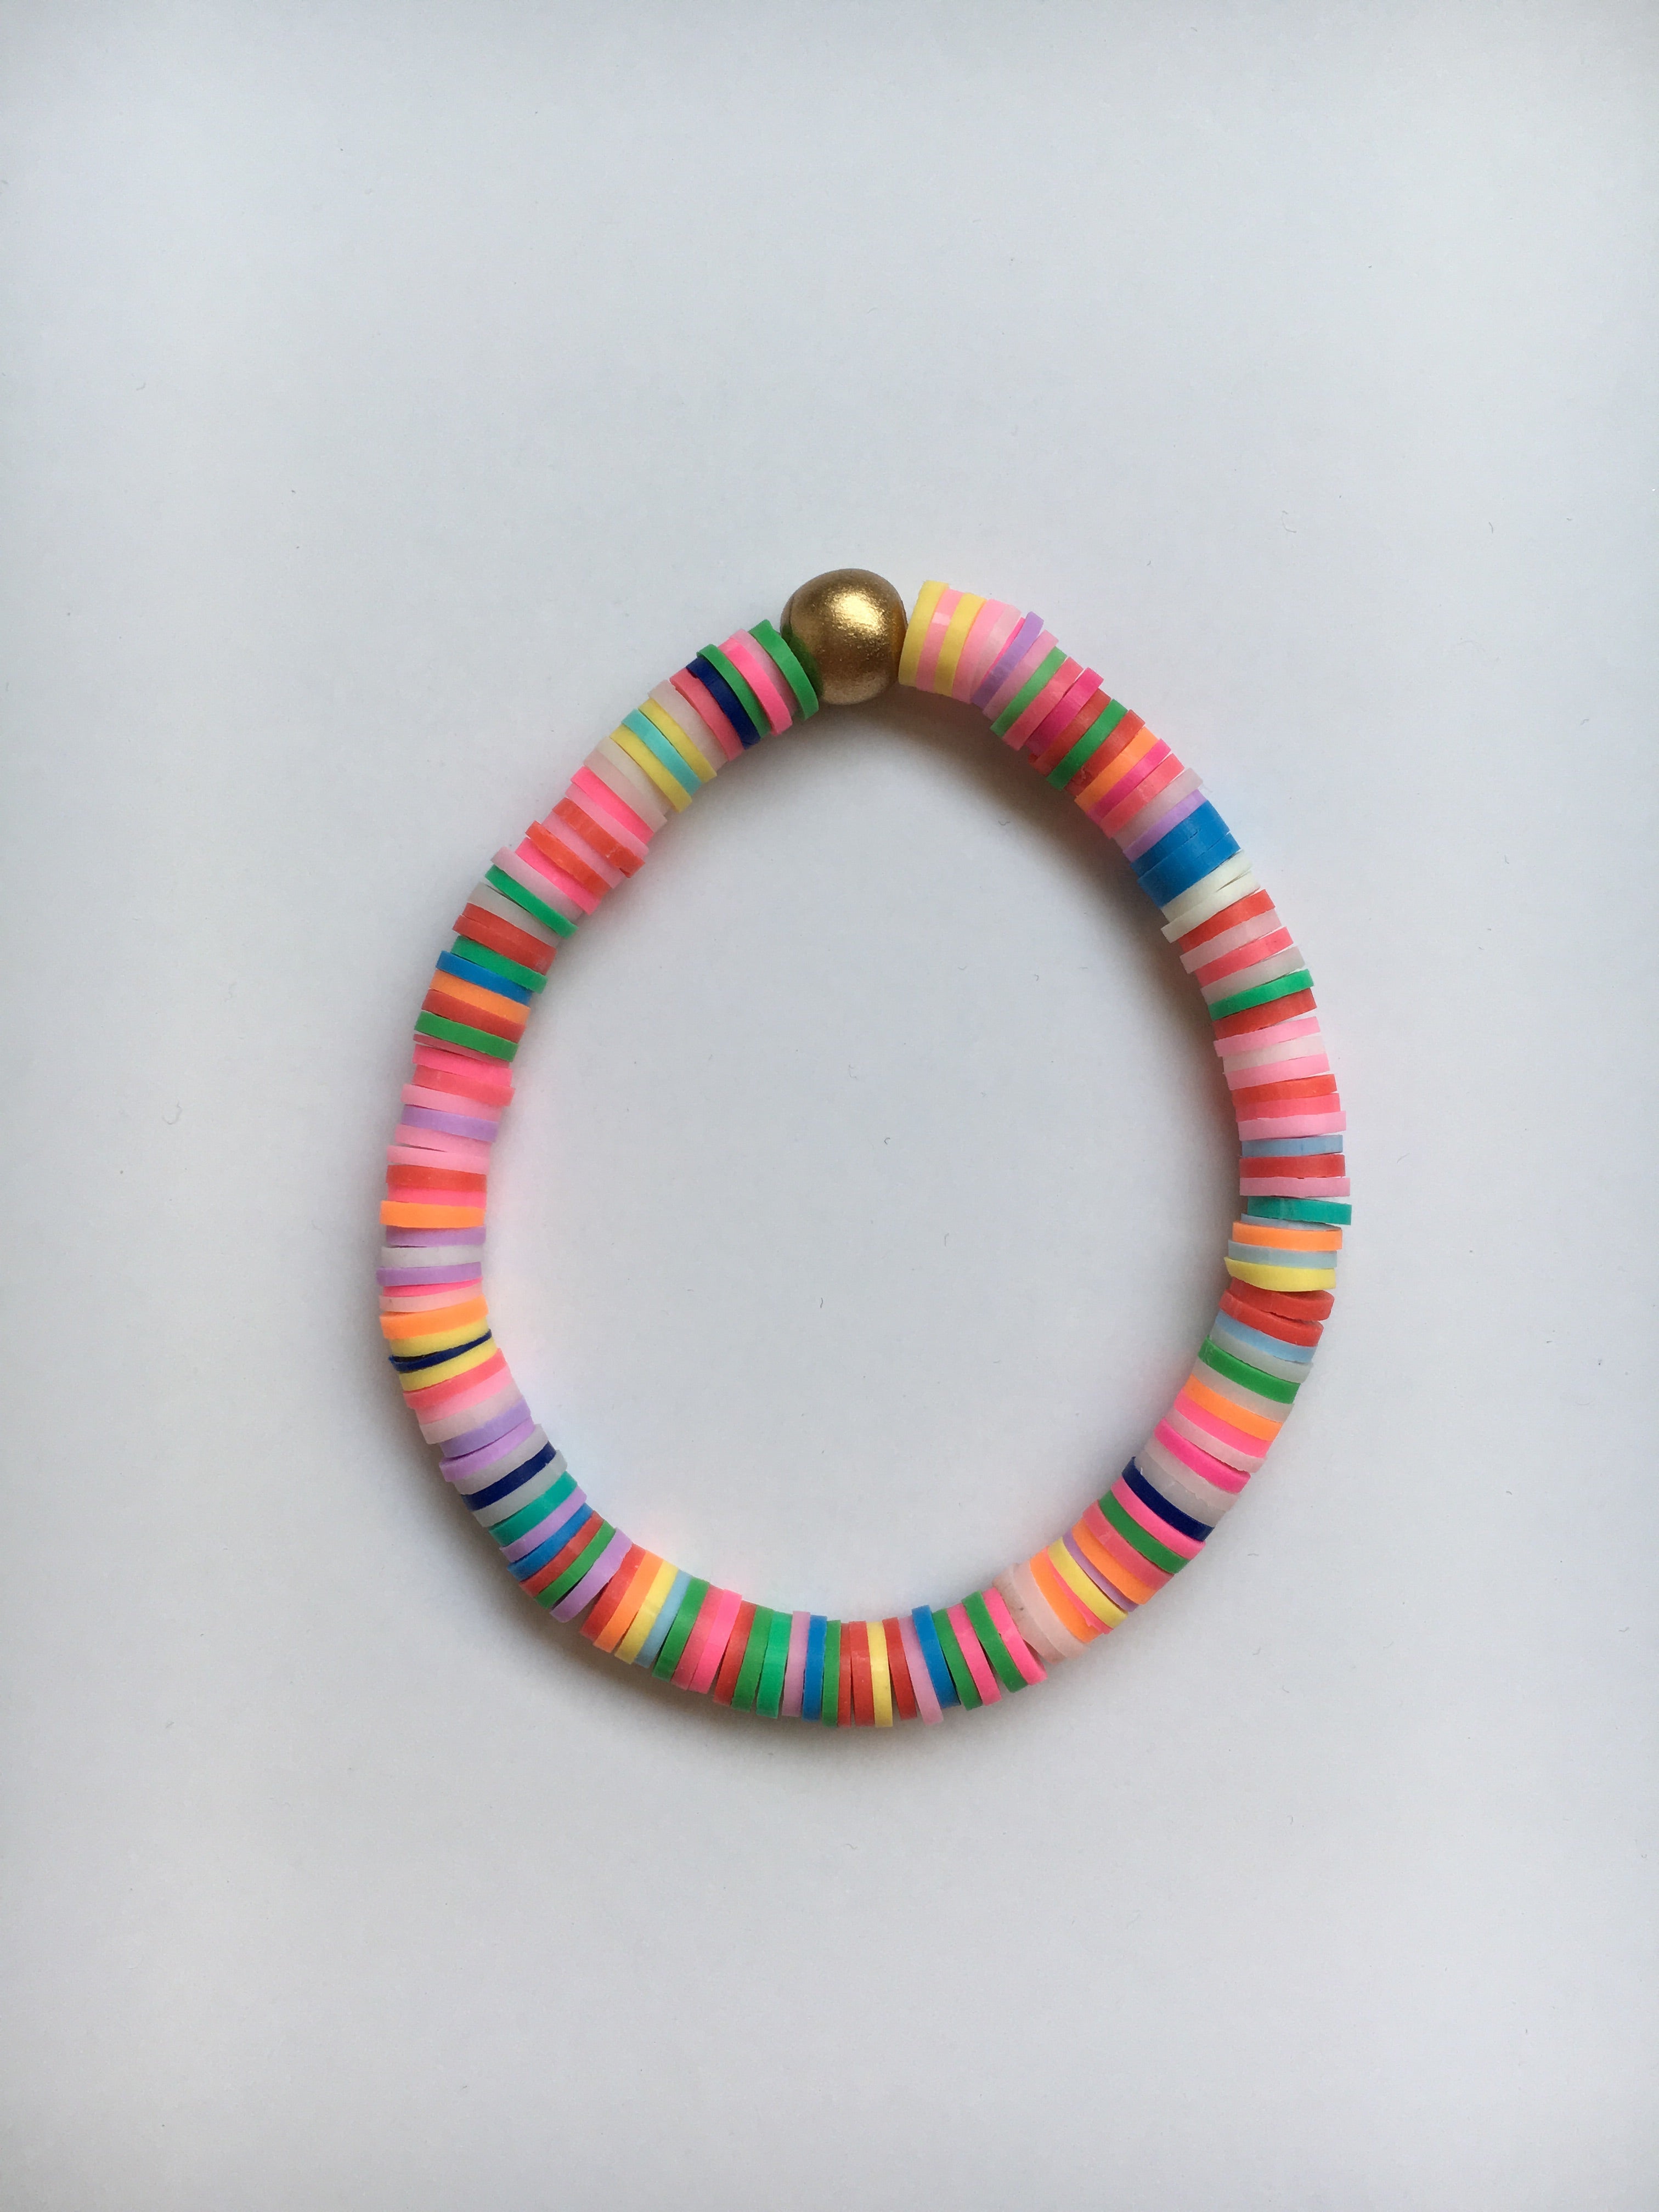 One Rainbow Confetti vinyl and wood Beaded Bracelet laying on table